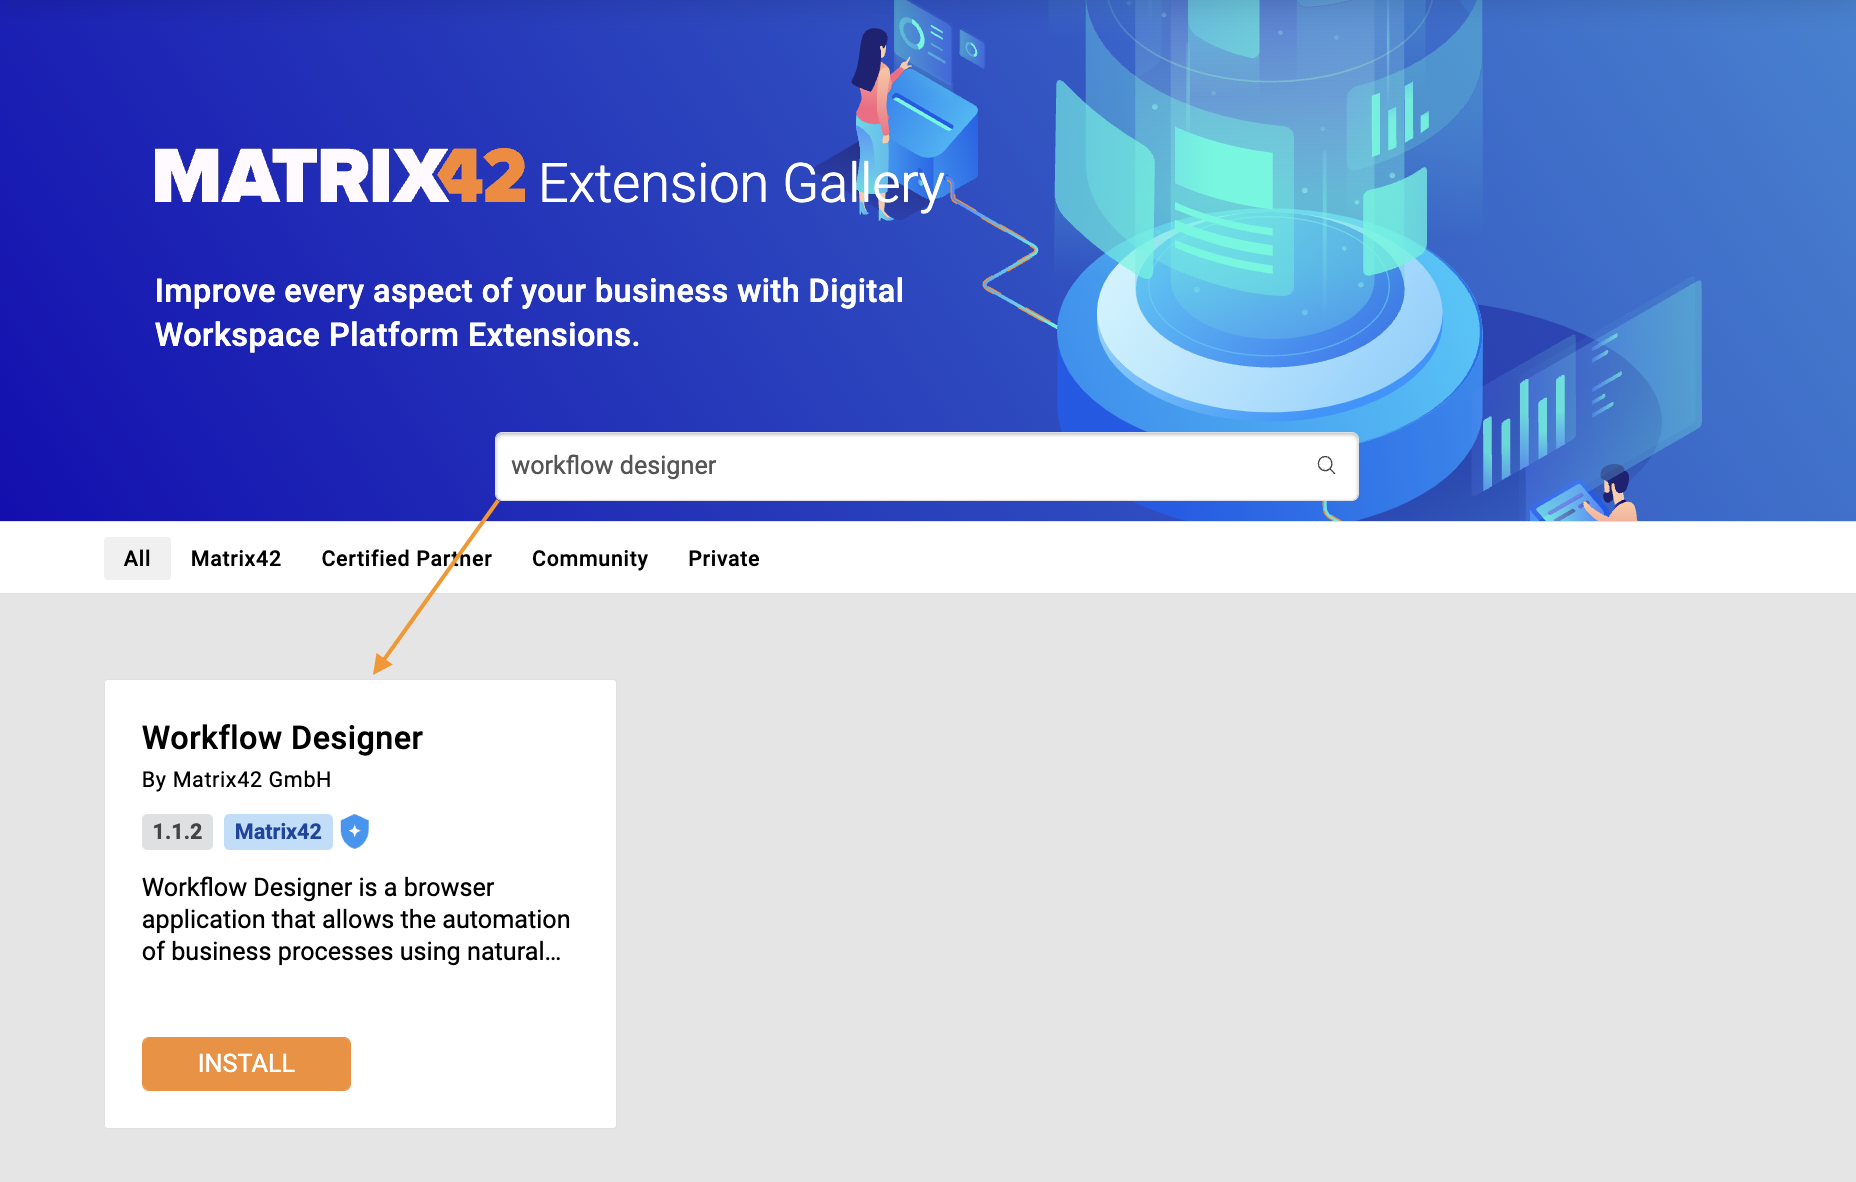 wfdesigner_extension_gallery.png